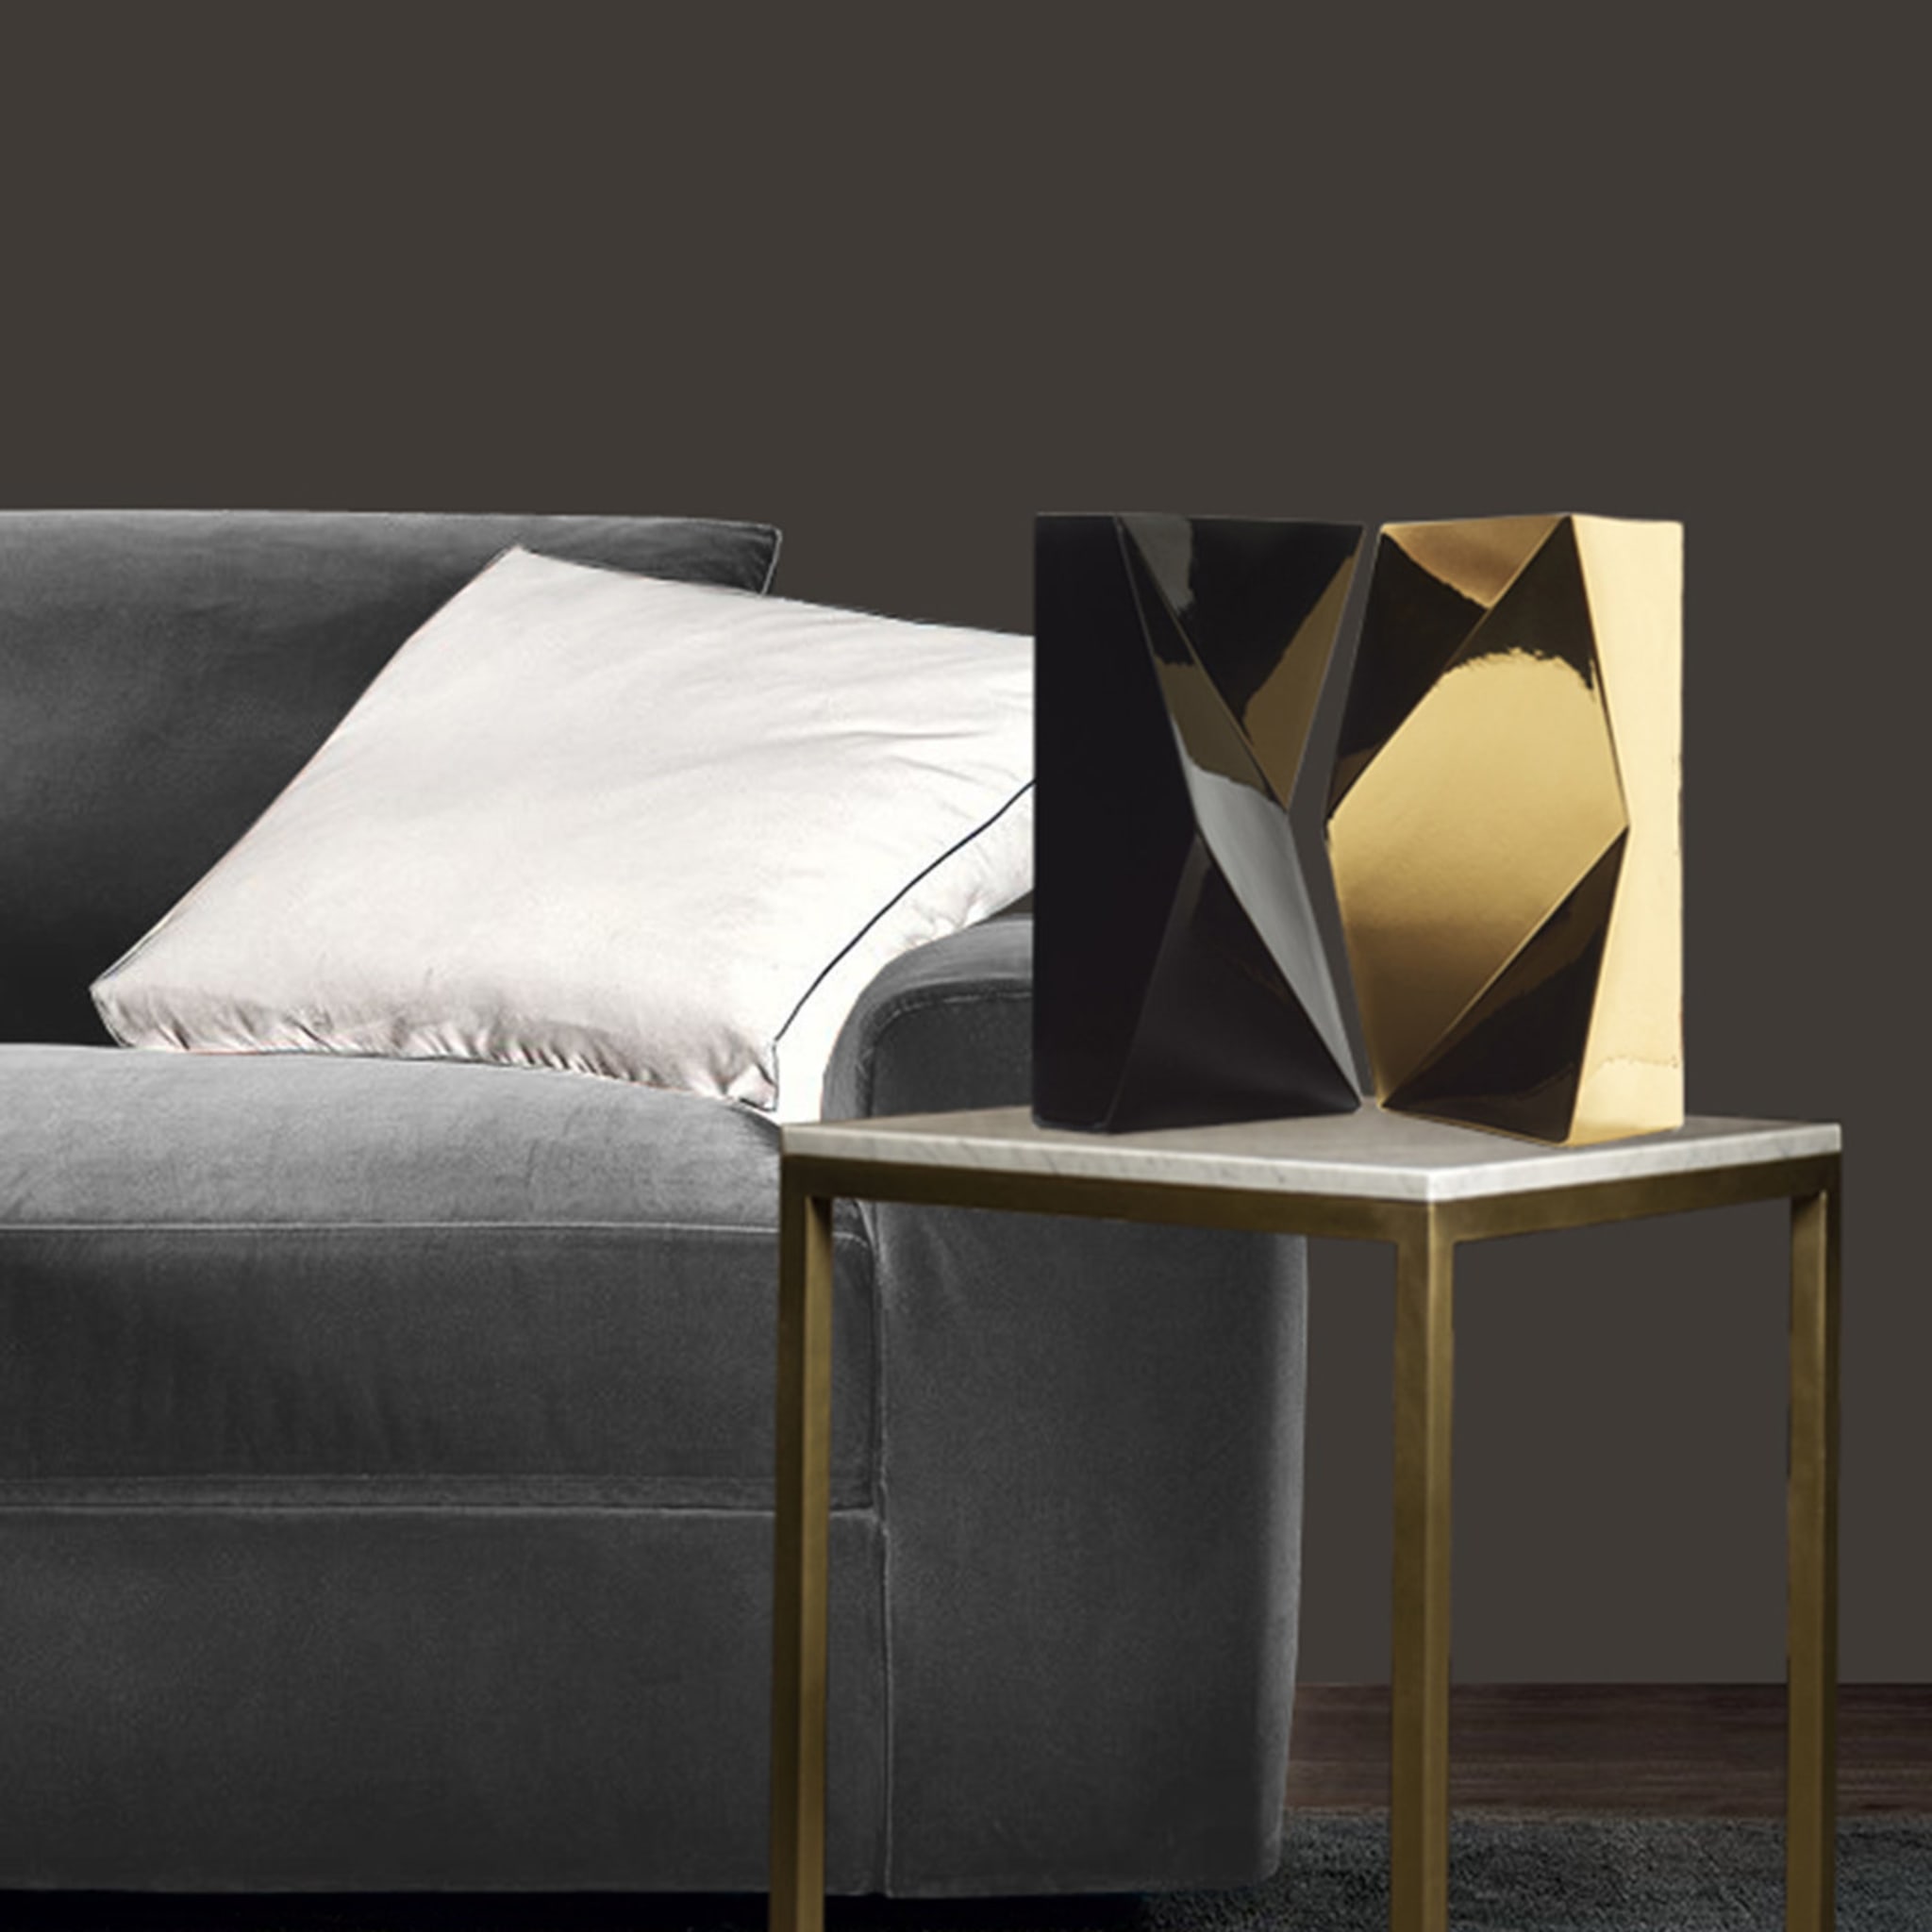 Esopo Brass and White Marble Side Table by Antonio Saporito - Alternative view 2